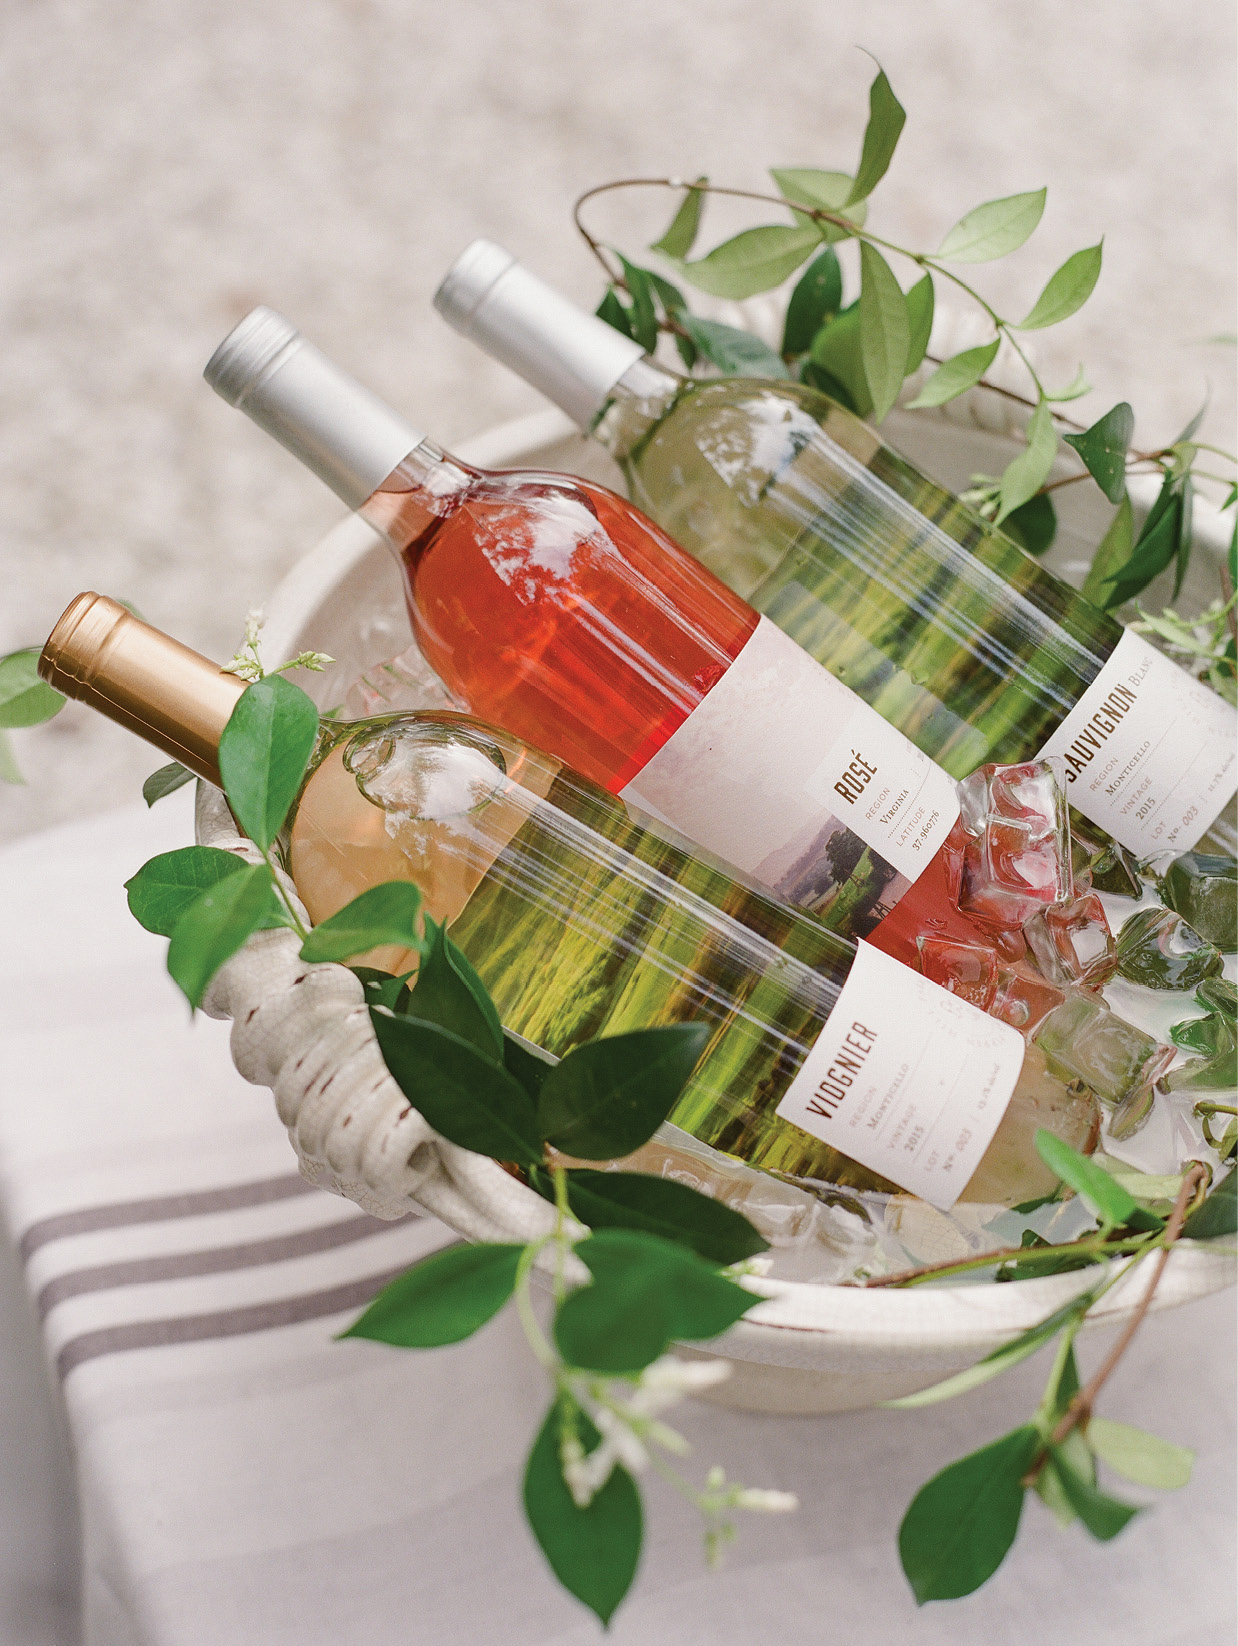 For the “bar,” Lynn filled a Vietri planter with ice and just-plucked jasmine vines to chill a variety of their Pippin Hill Farm &amp; Vineyard wines.